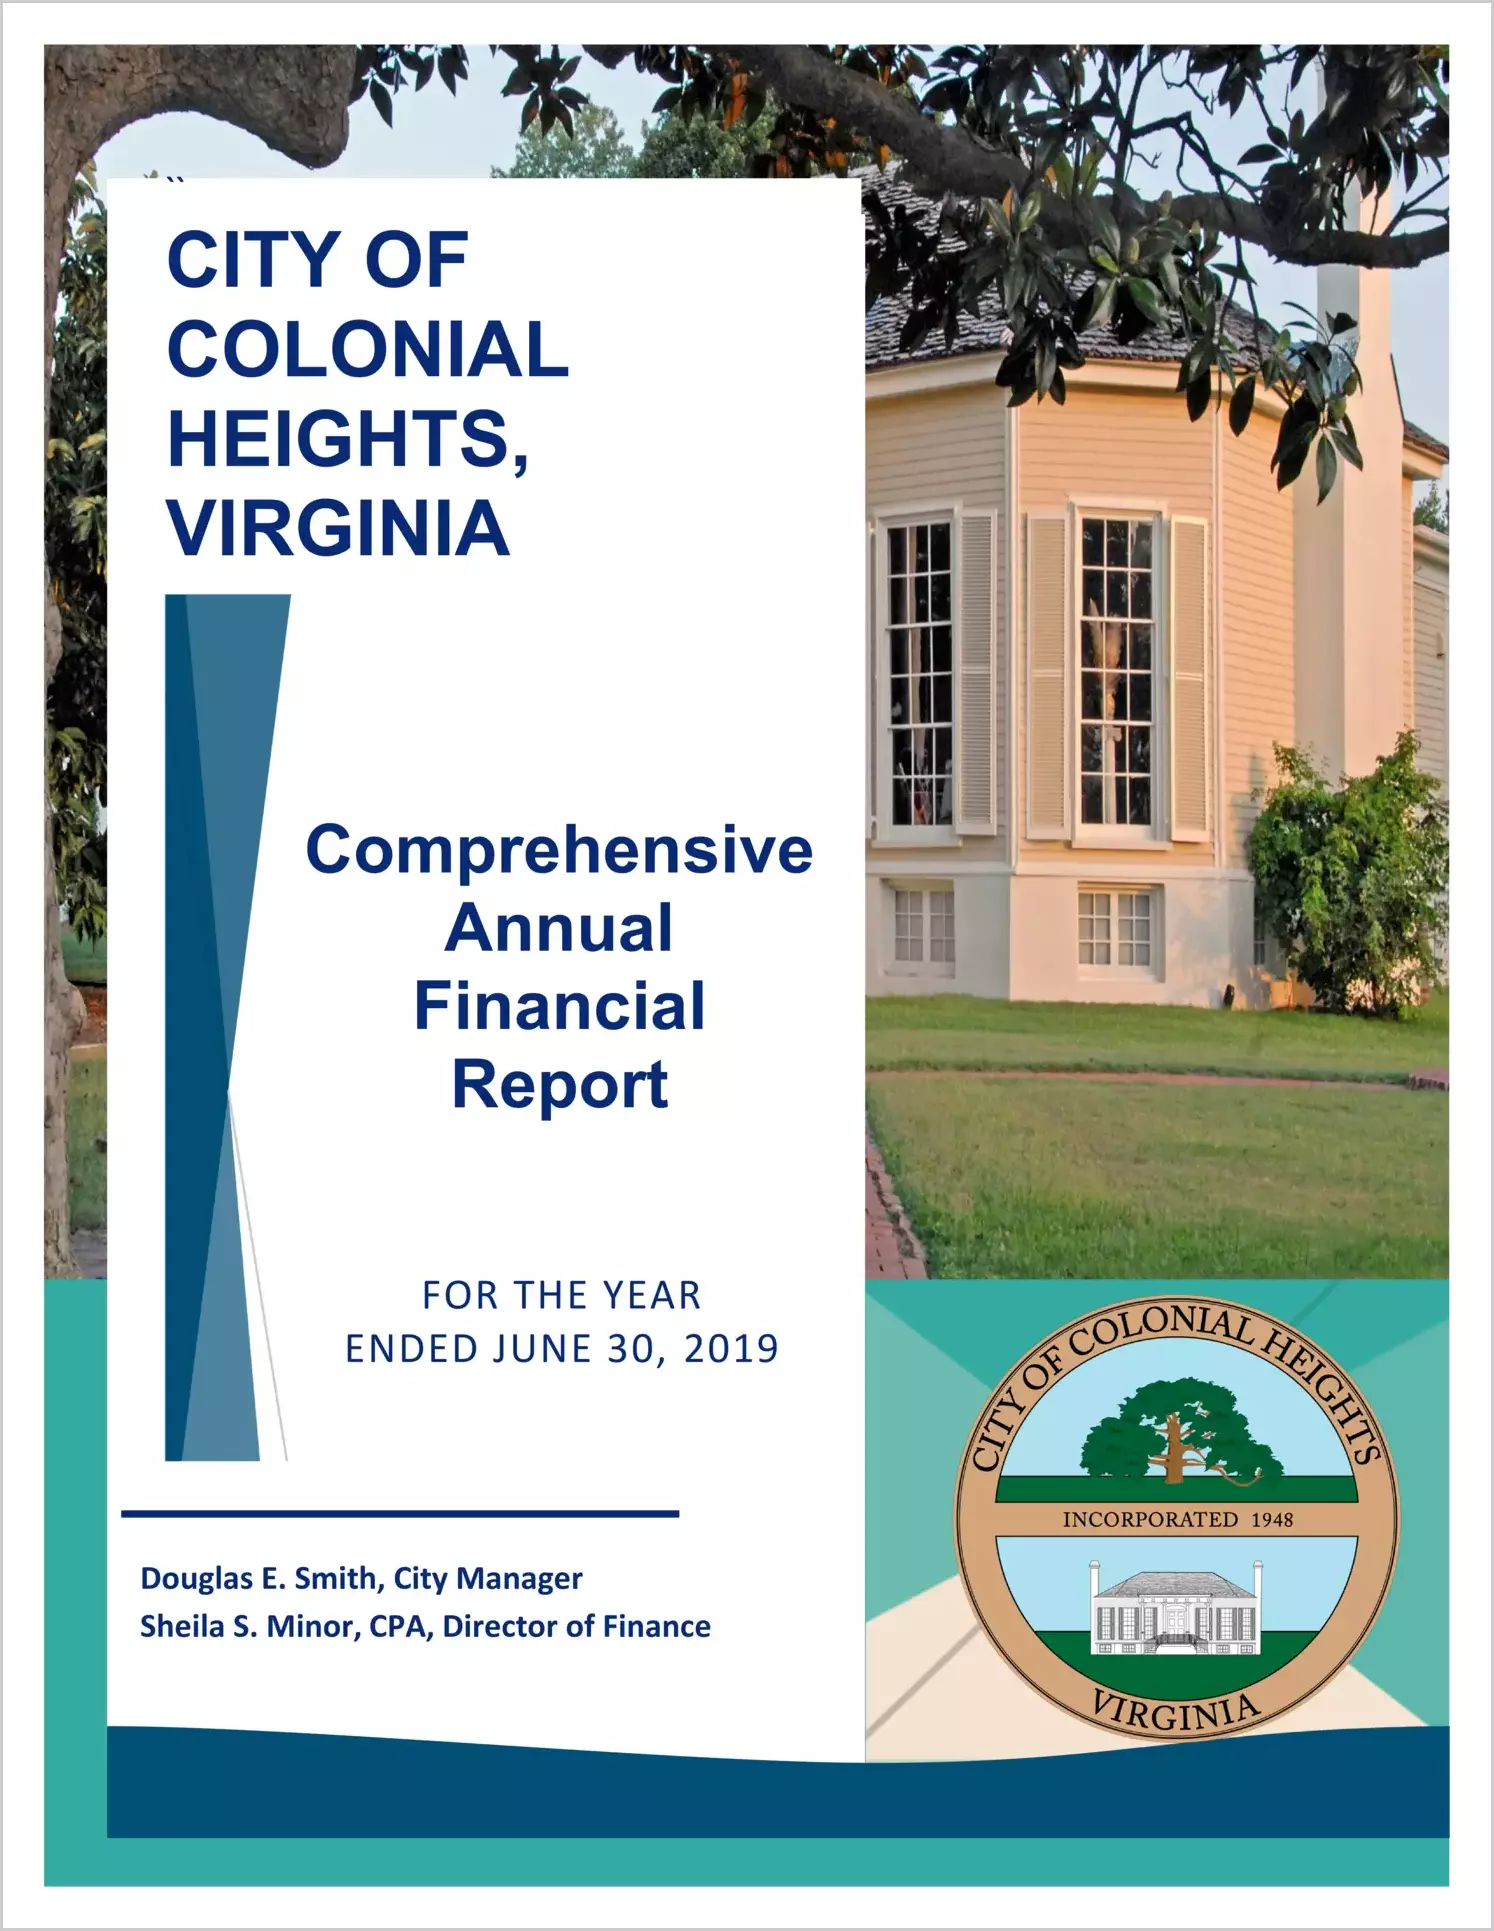 2019 Annual Financial Report for City of Colonial Heights